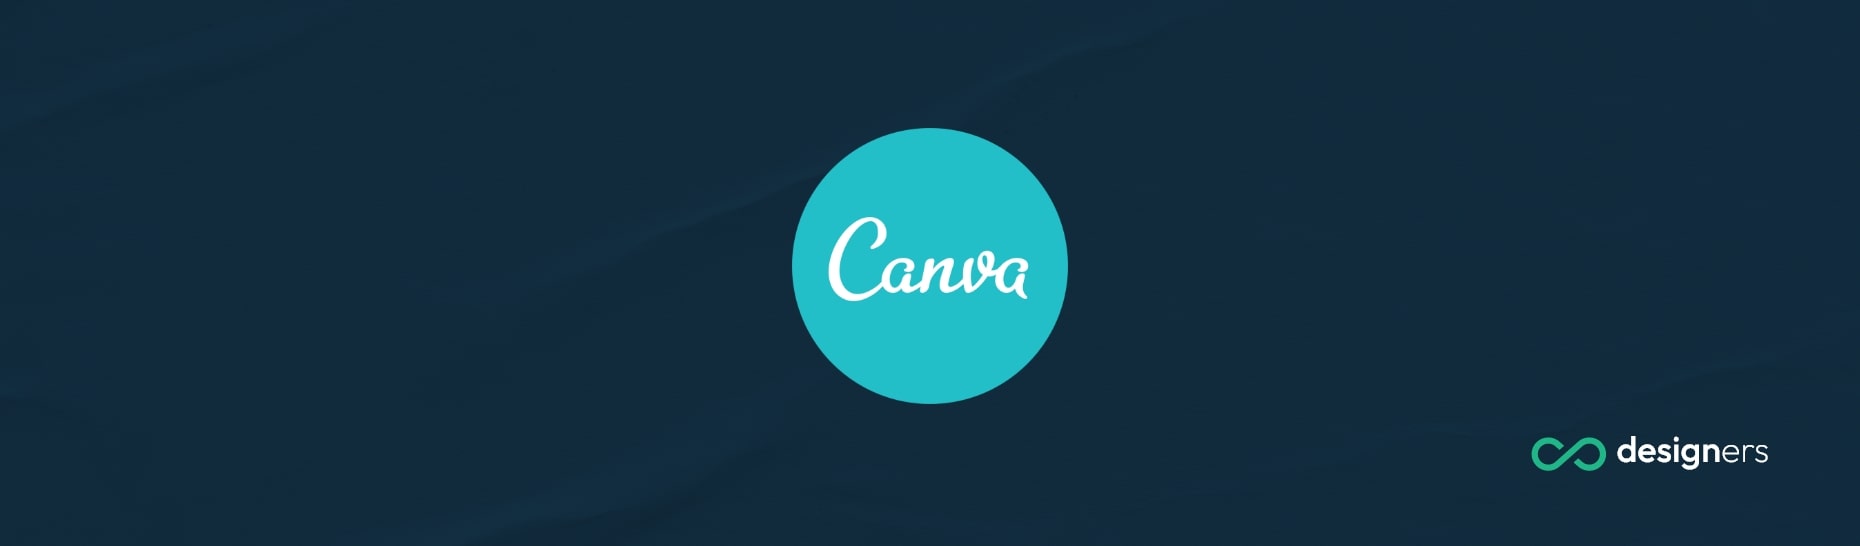 Can I Use Canva to Sell Printables on Etsy?